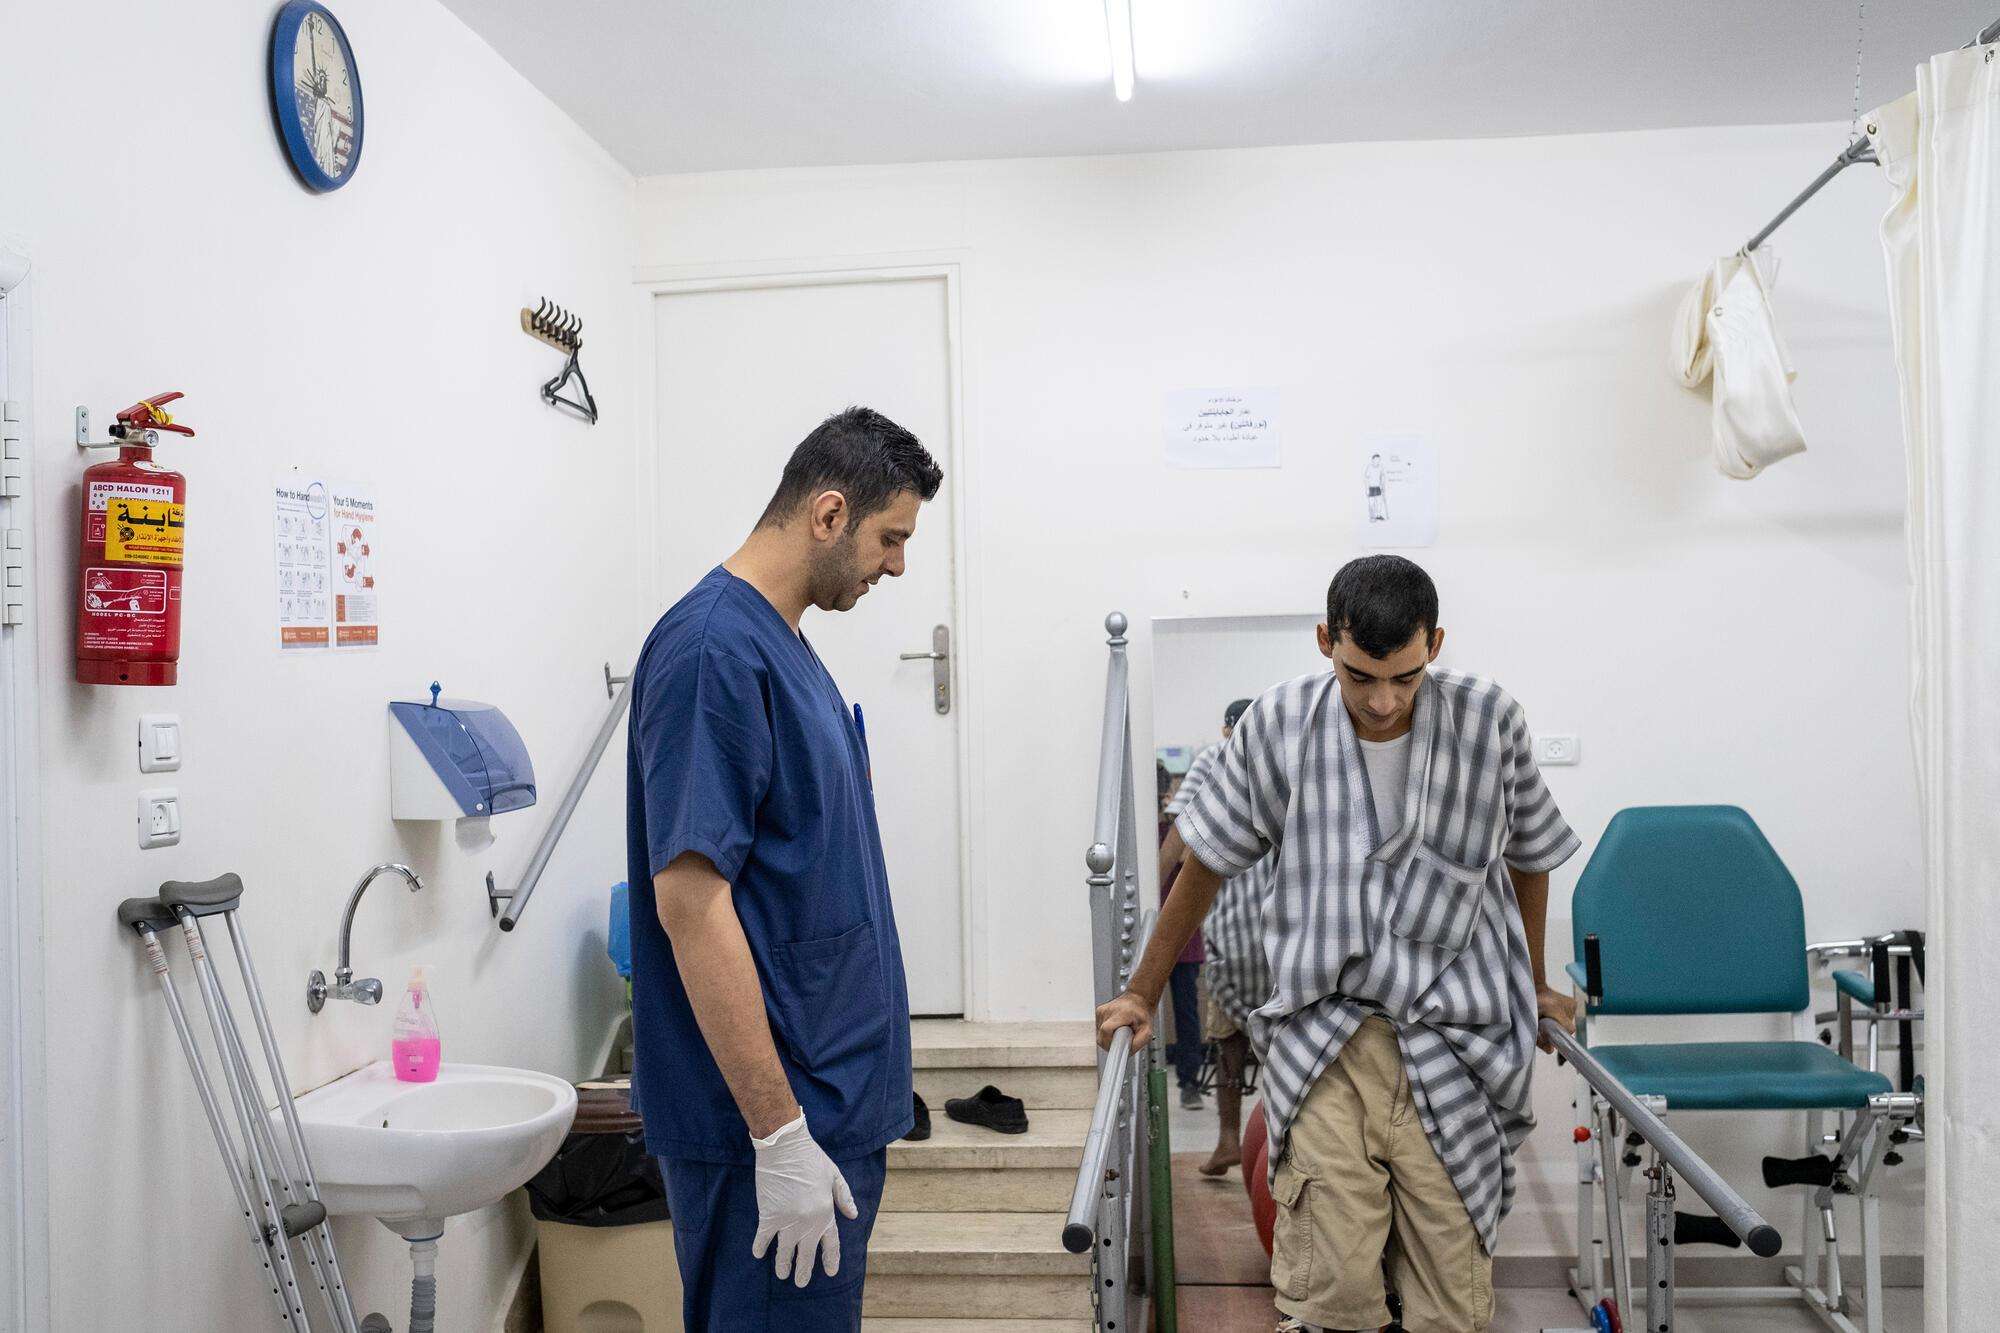 Portraits of MSF health workers in Gaza healing the wounds of the Great March of Return